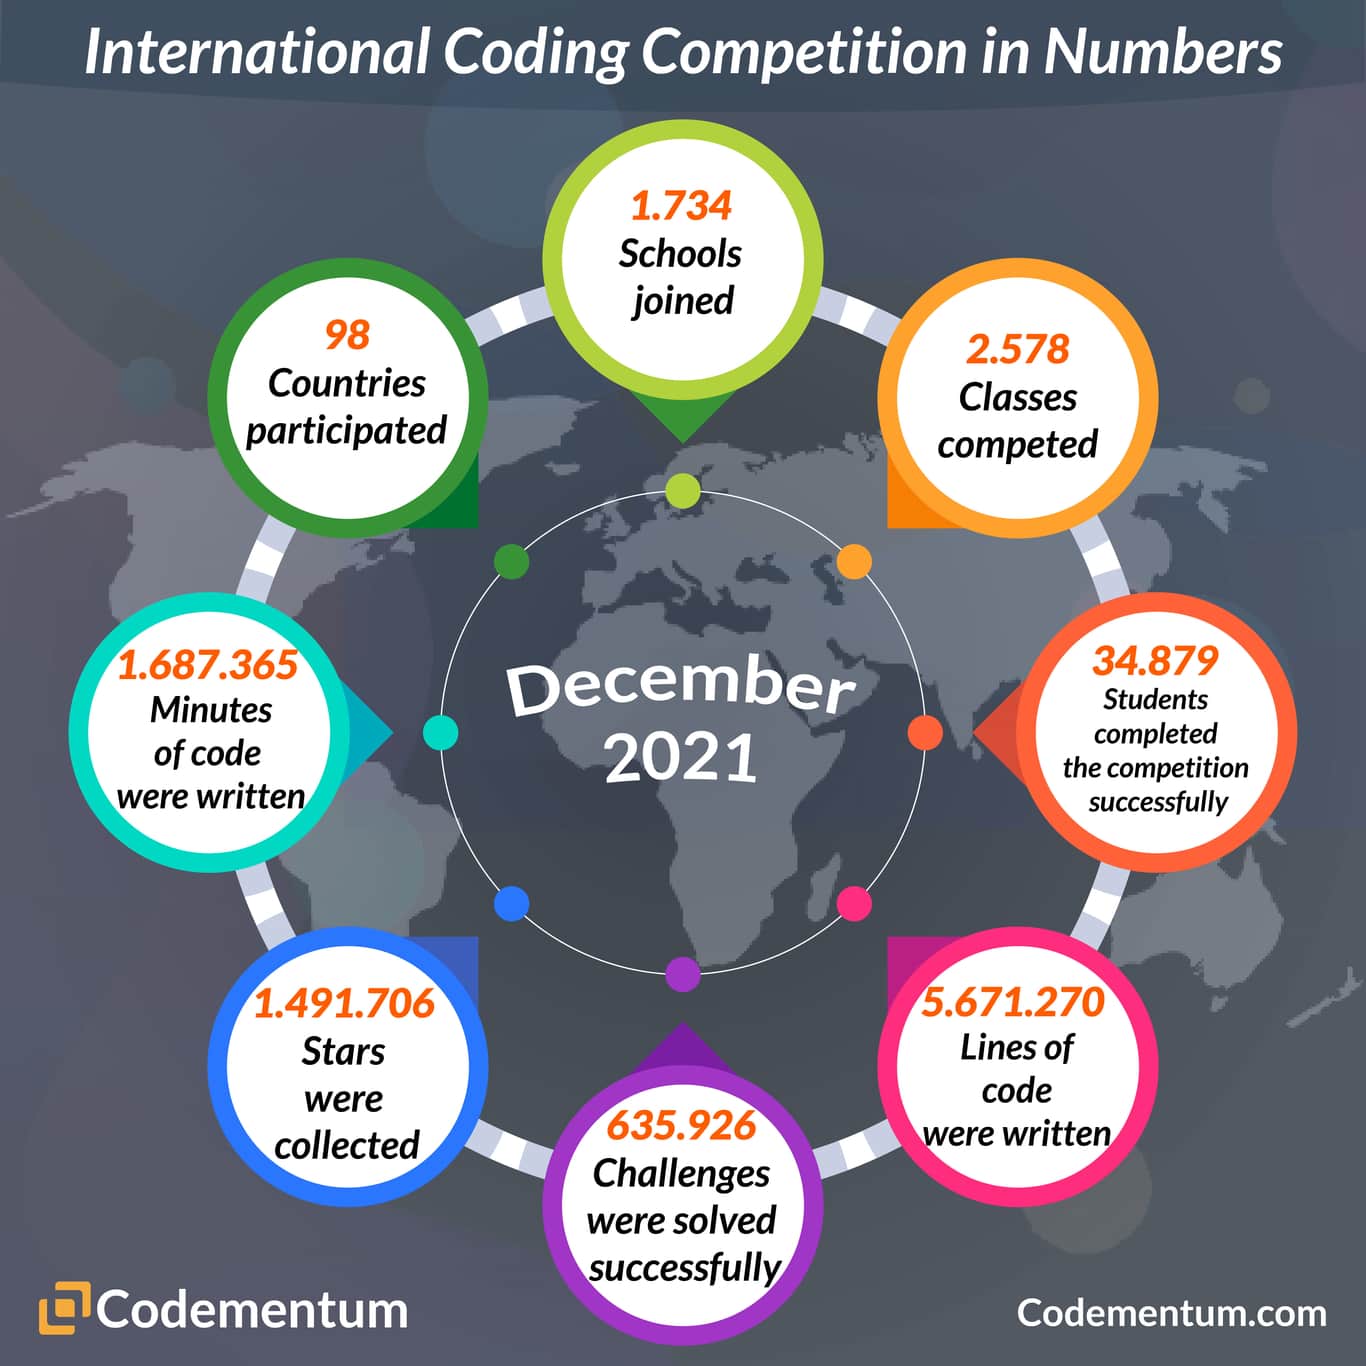 International Coding Competition